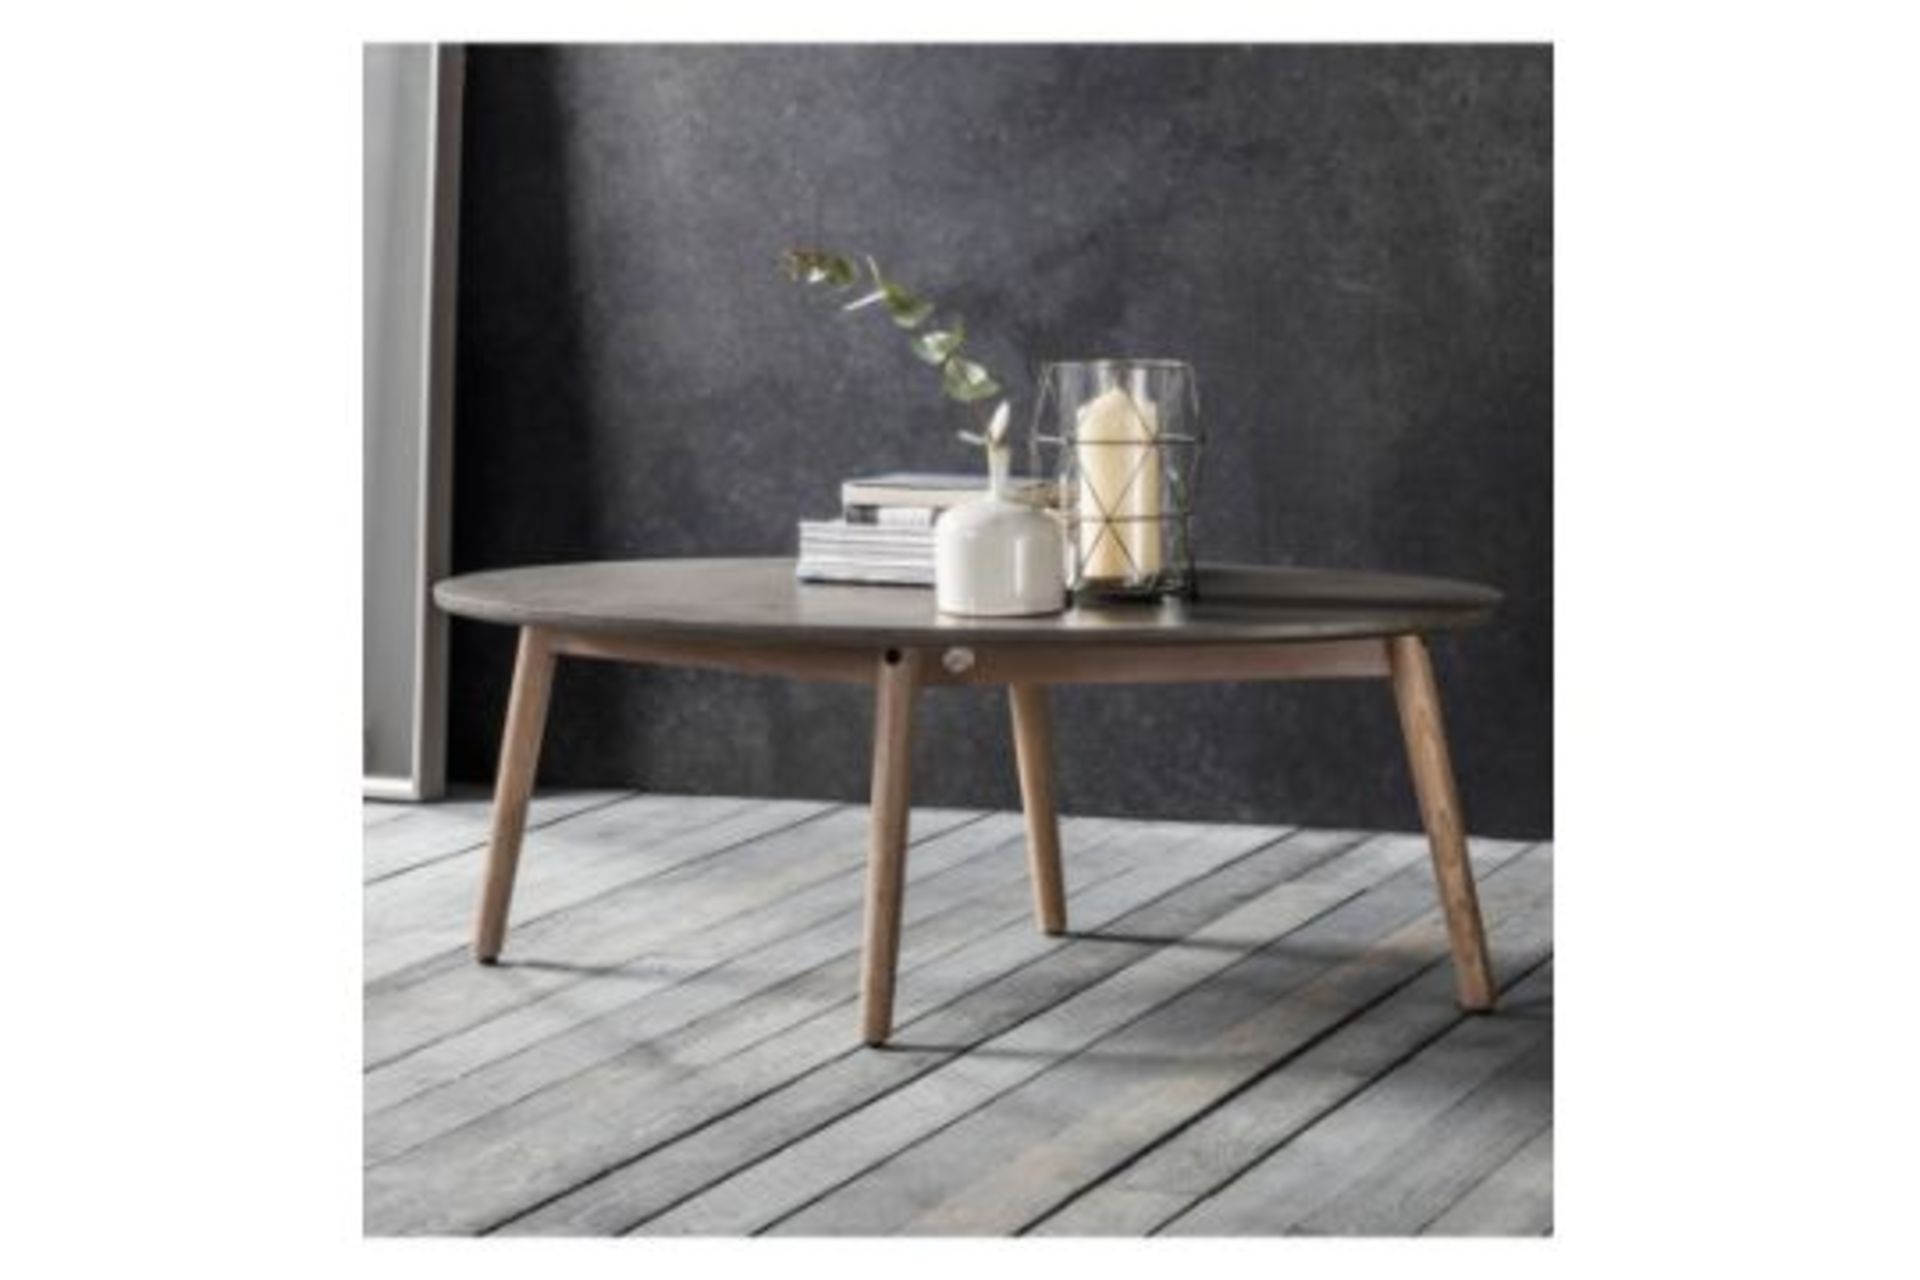 Bergen Oval Coffee Table The Bergen Coffee Table Is A Great Take On Scandi Meets Industrial, With